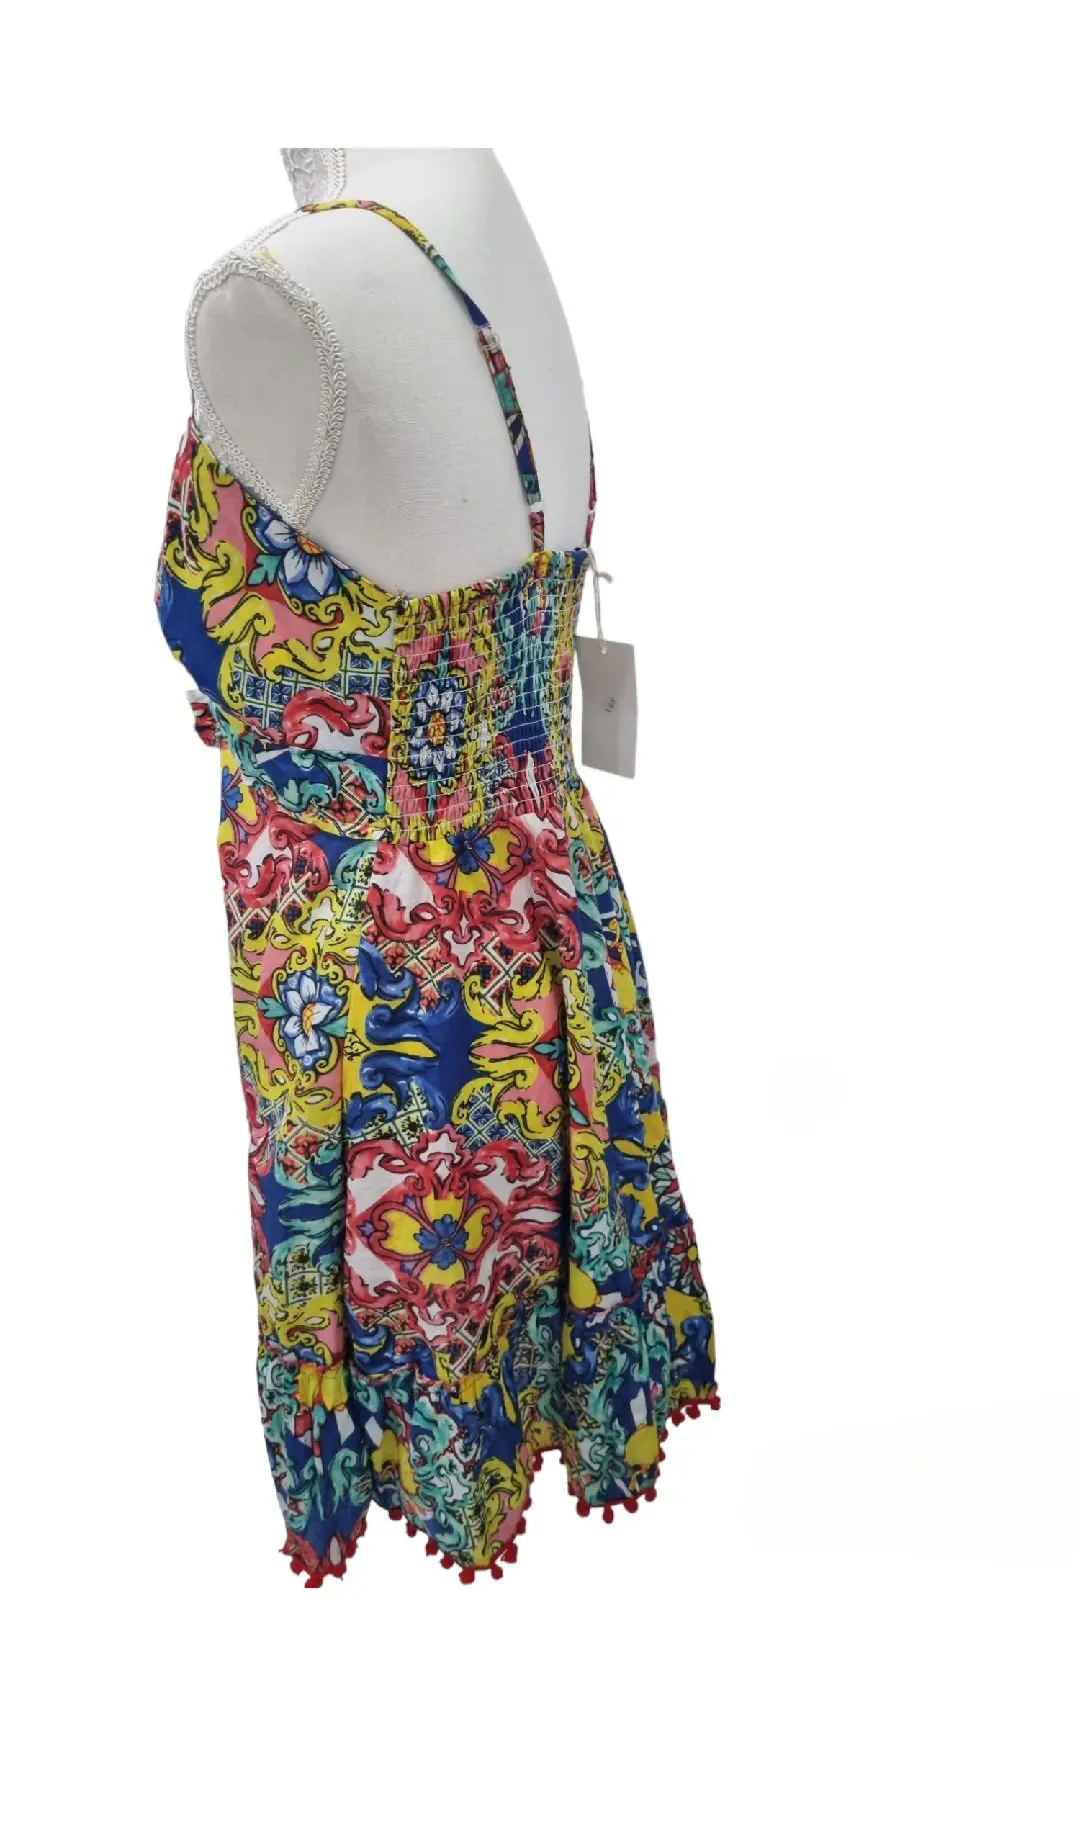 Short 100% cotton dress with adjustable straps, elasticated back and pom pom at the end. One size Rosalia women's pattern